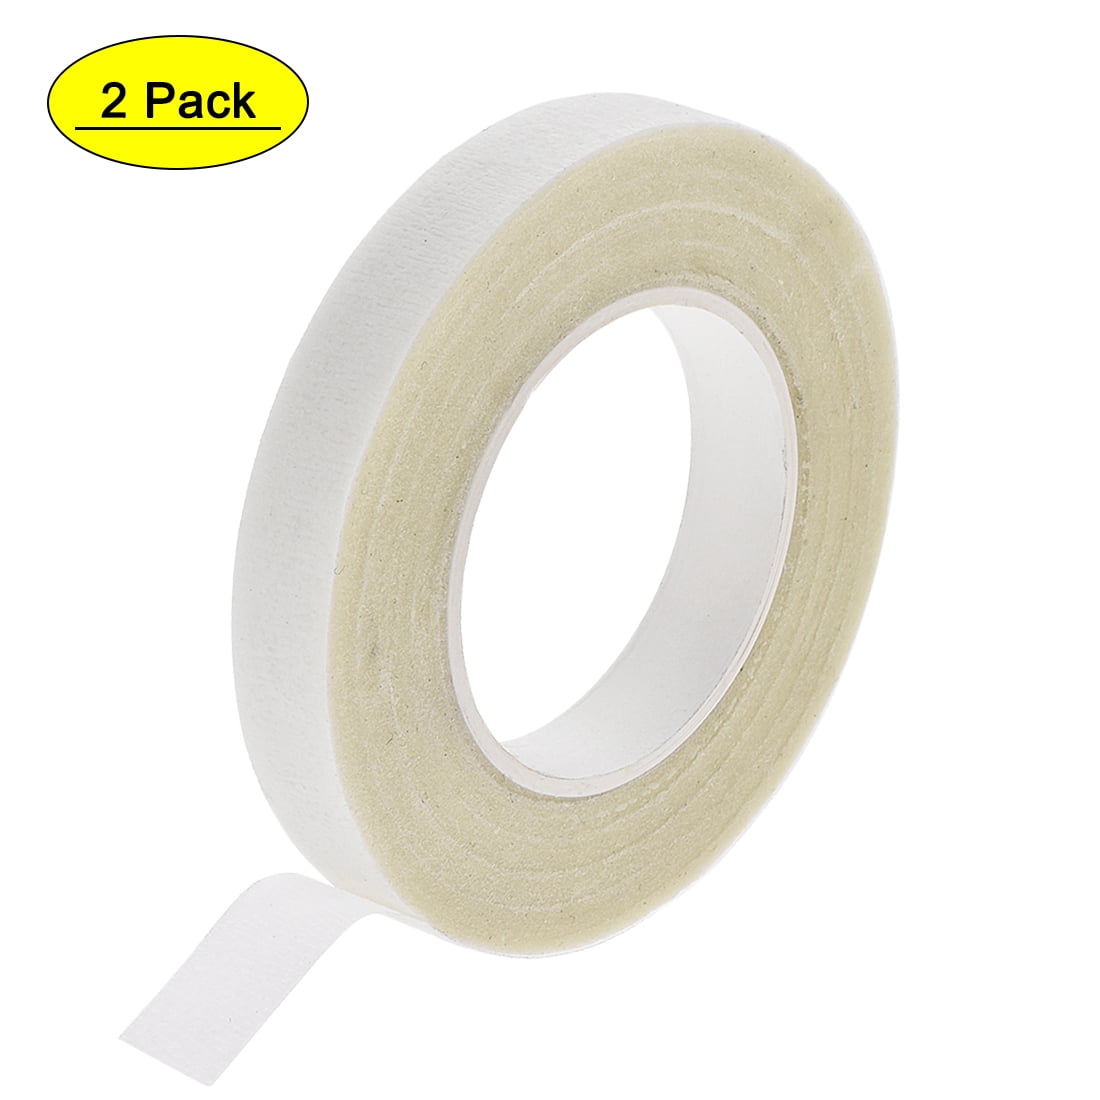 2,200 X Adhesive Foam Pads Double Sided Self Adhesive Sticky Tiny White  Fixing Tabs 5mm 